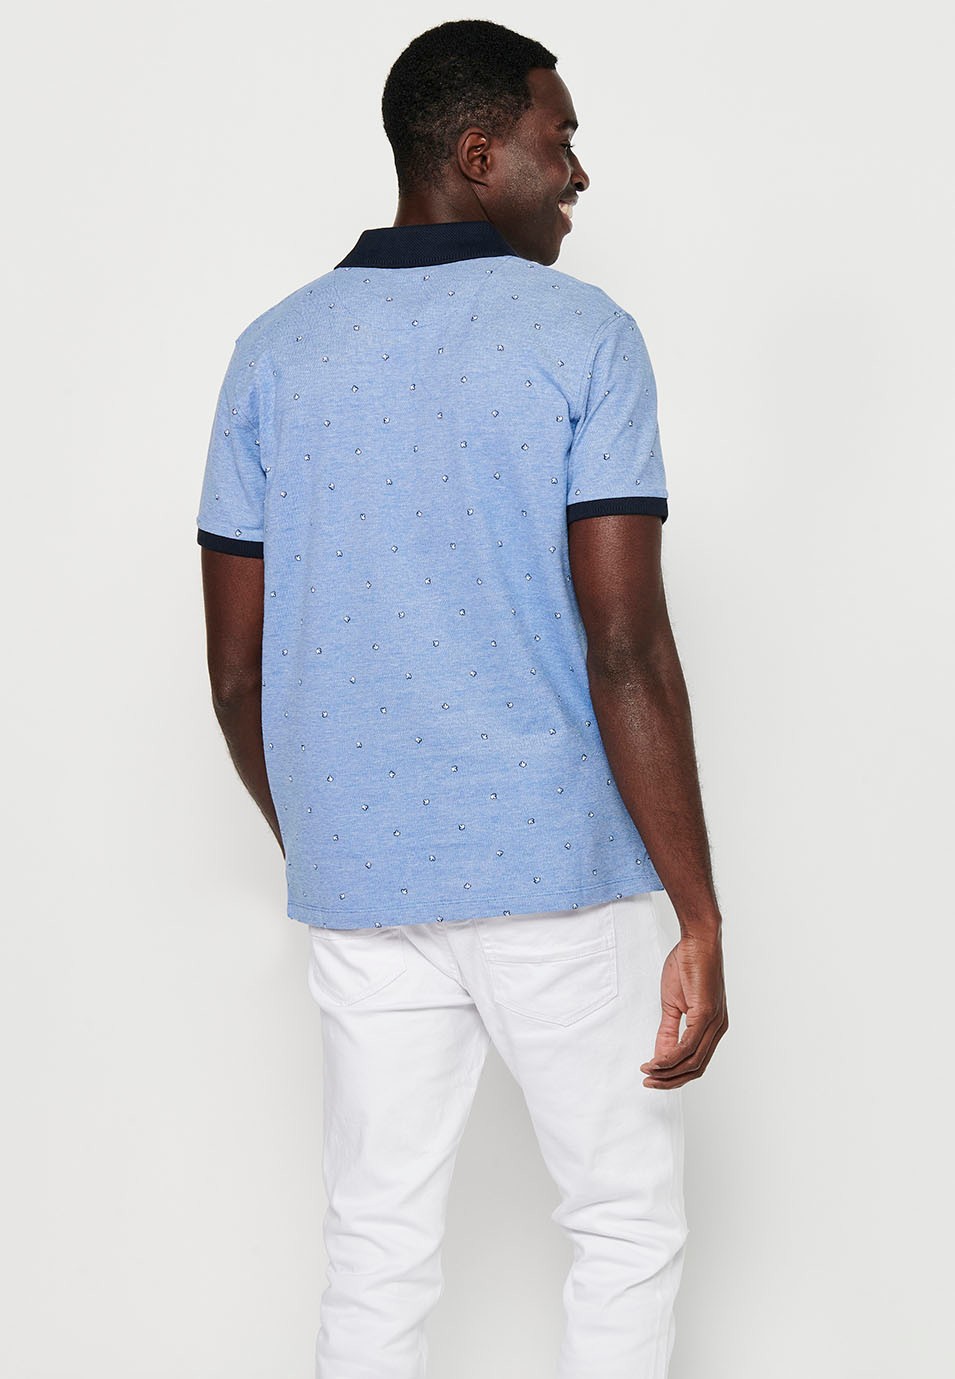 Short-sleeved cotton polo shirt, blue printed fabric for men